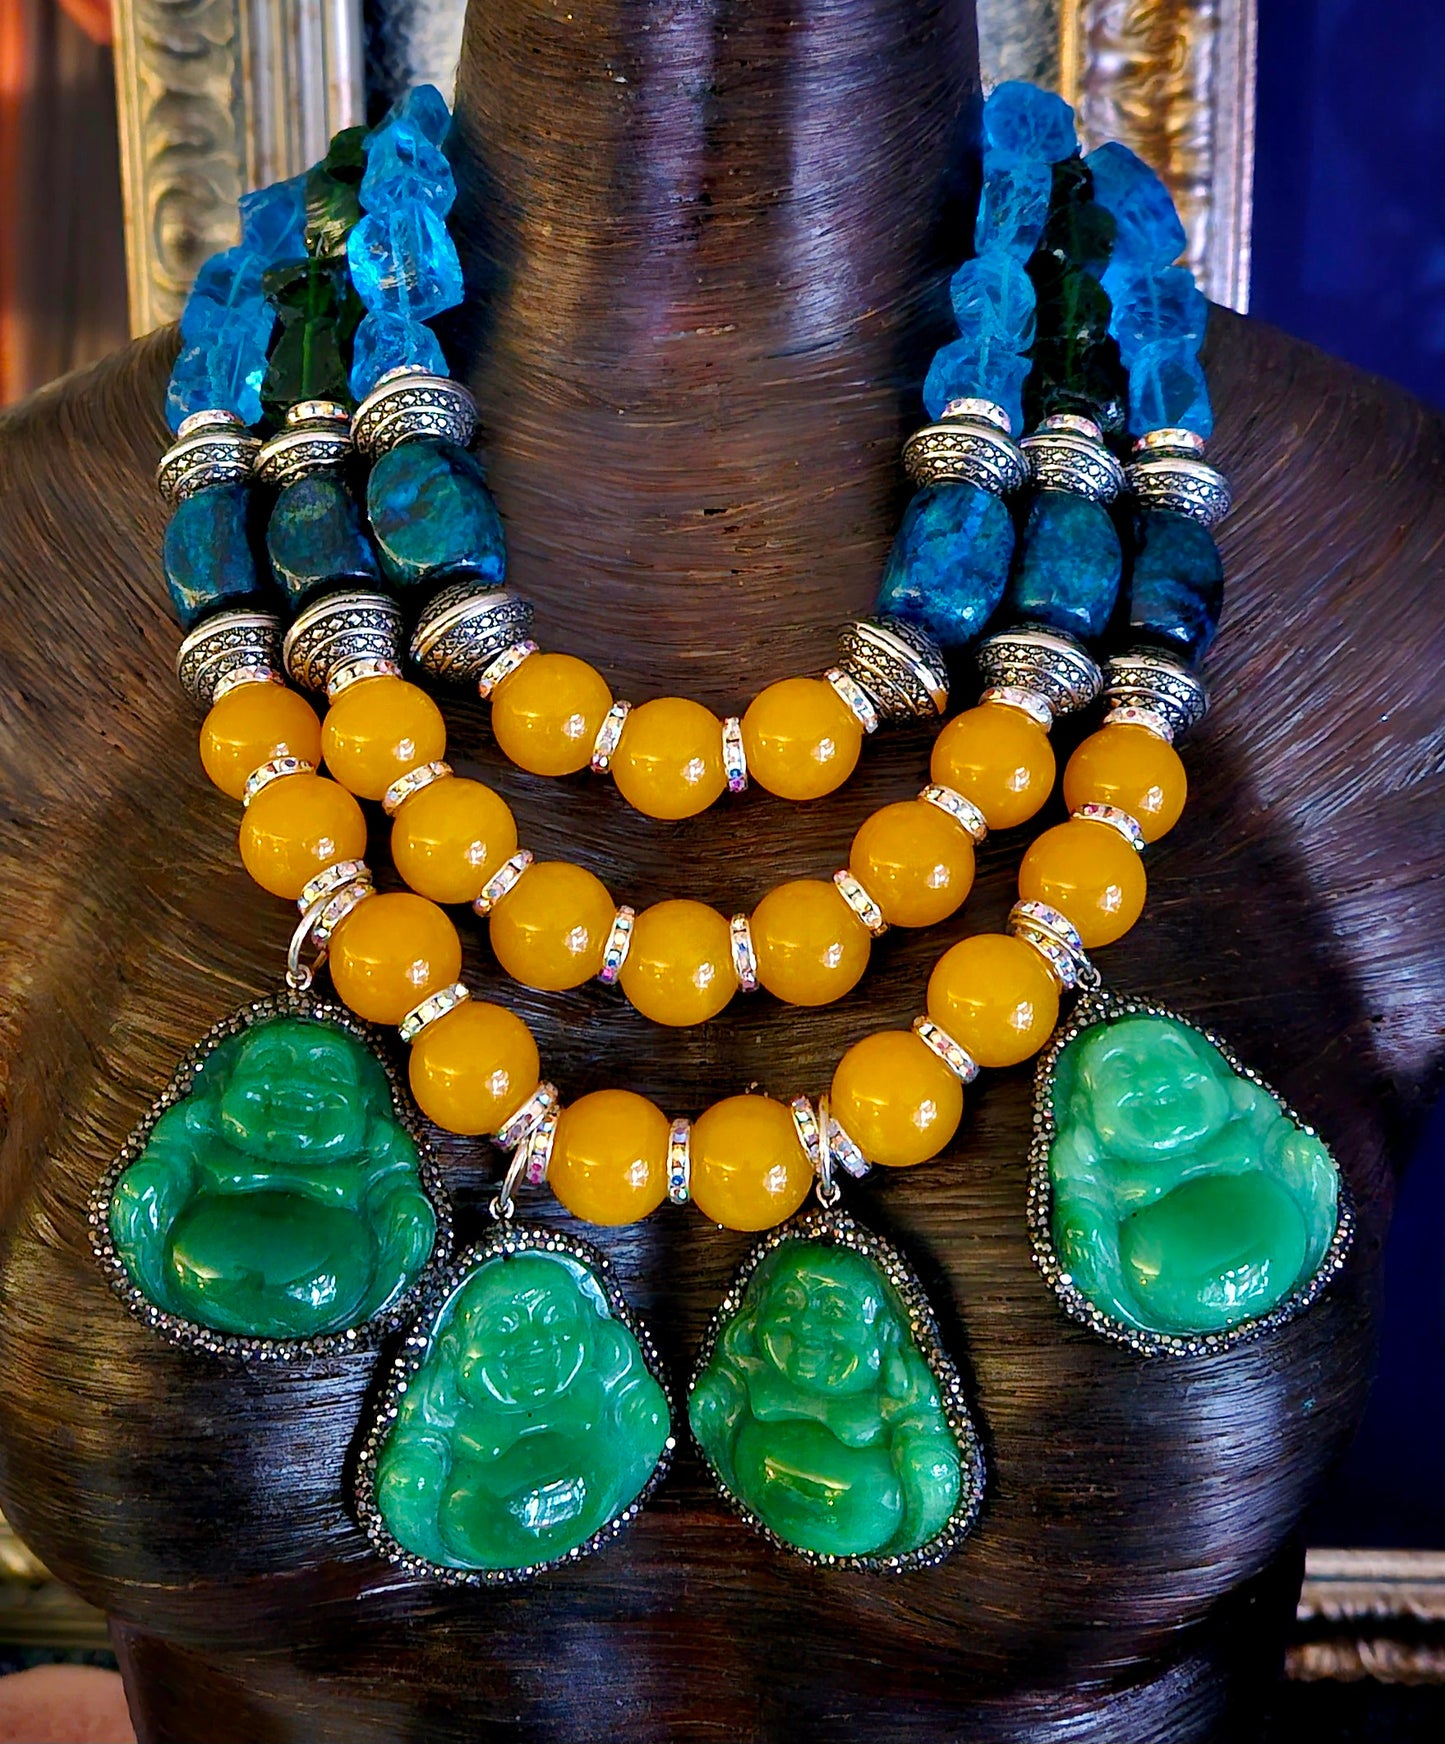 Luxury Green Blue & Yellow Jade Beaded Necklace with Buddha Dangles, Bold Chunky Heavy Gemstone Chest Piece, High End Photoshoot Jewelry, OOAK Art to Wear Collectors